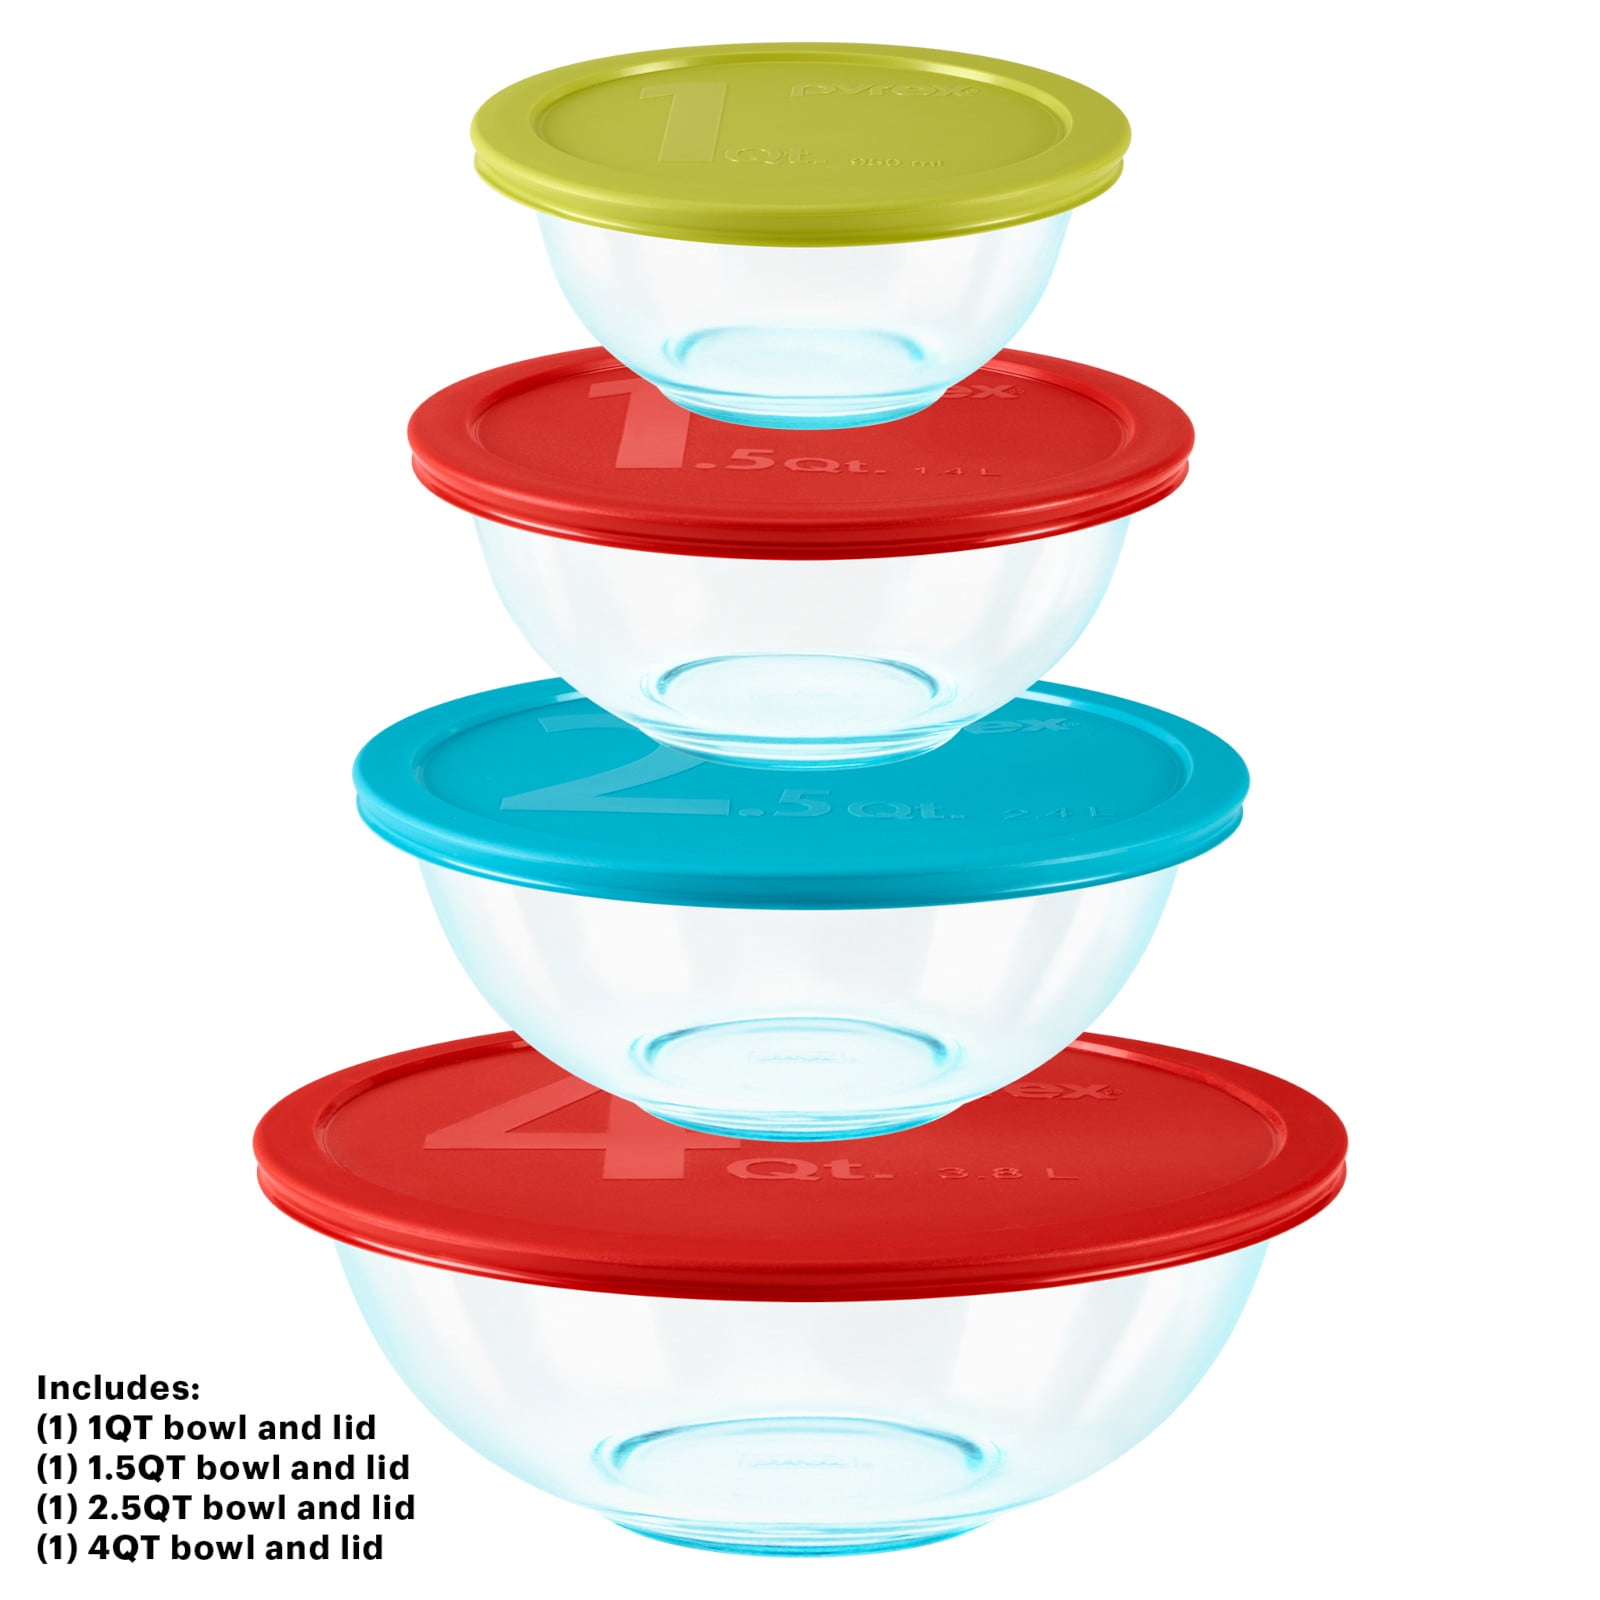 Pyrex glass mixing bowl/food storage sets with lids for $15 (Reg. up to $28)